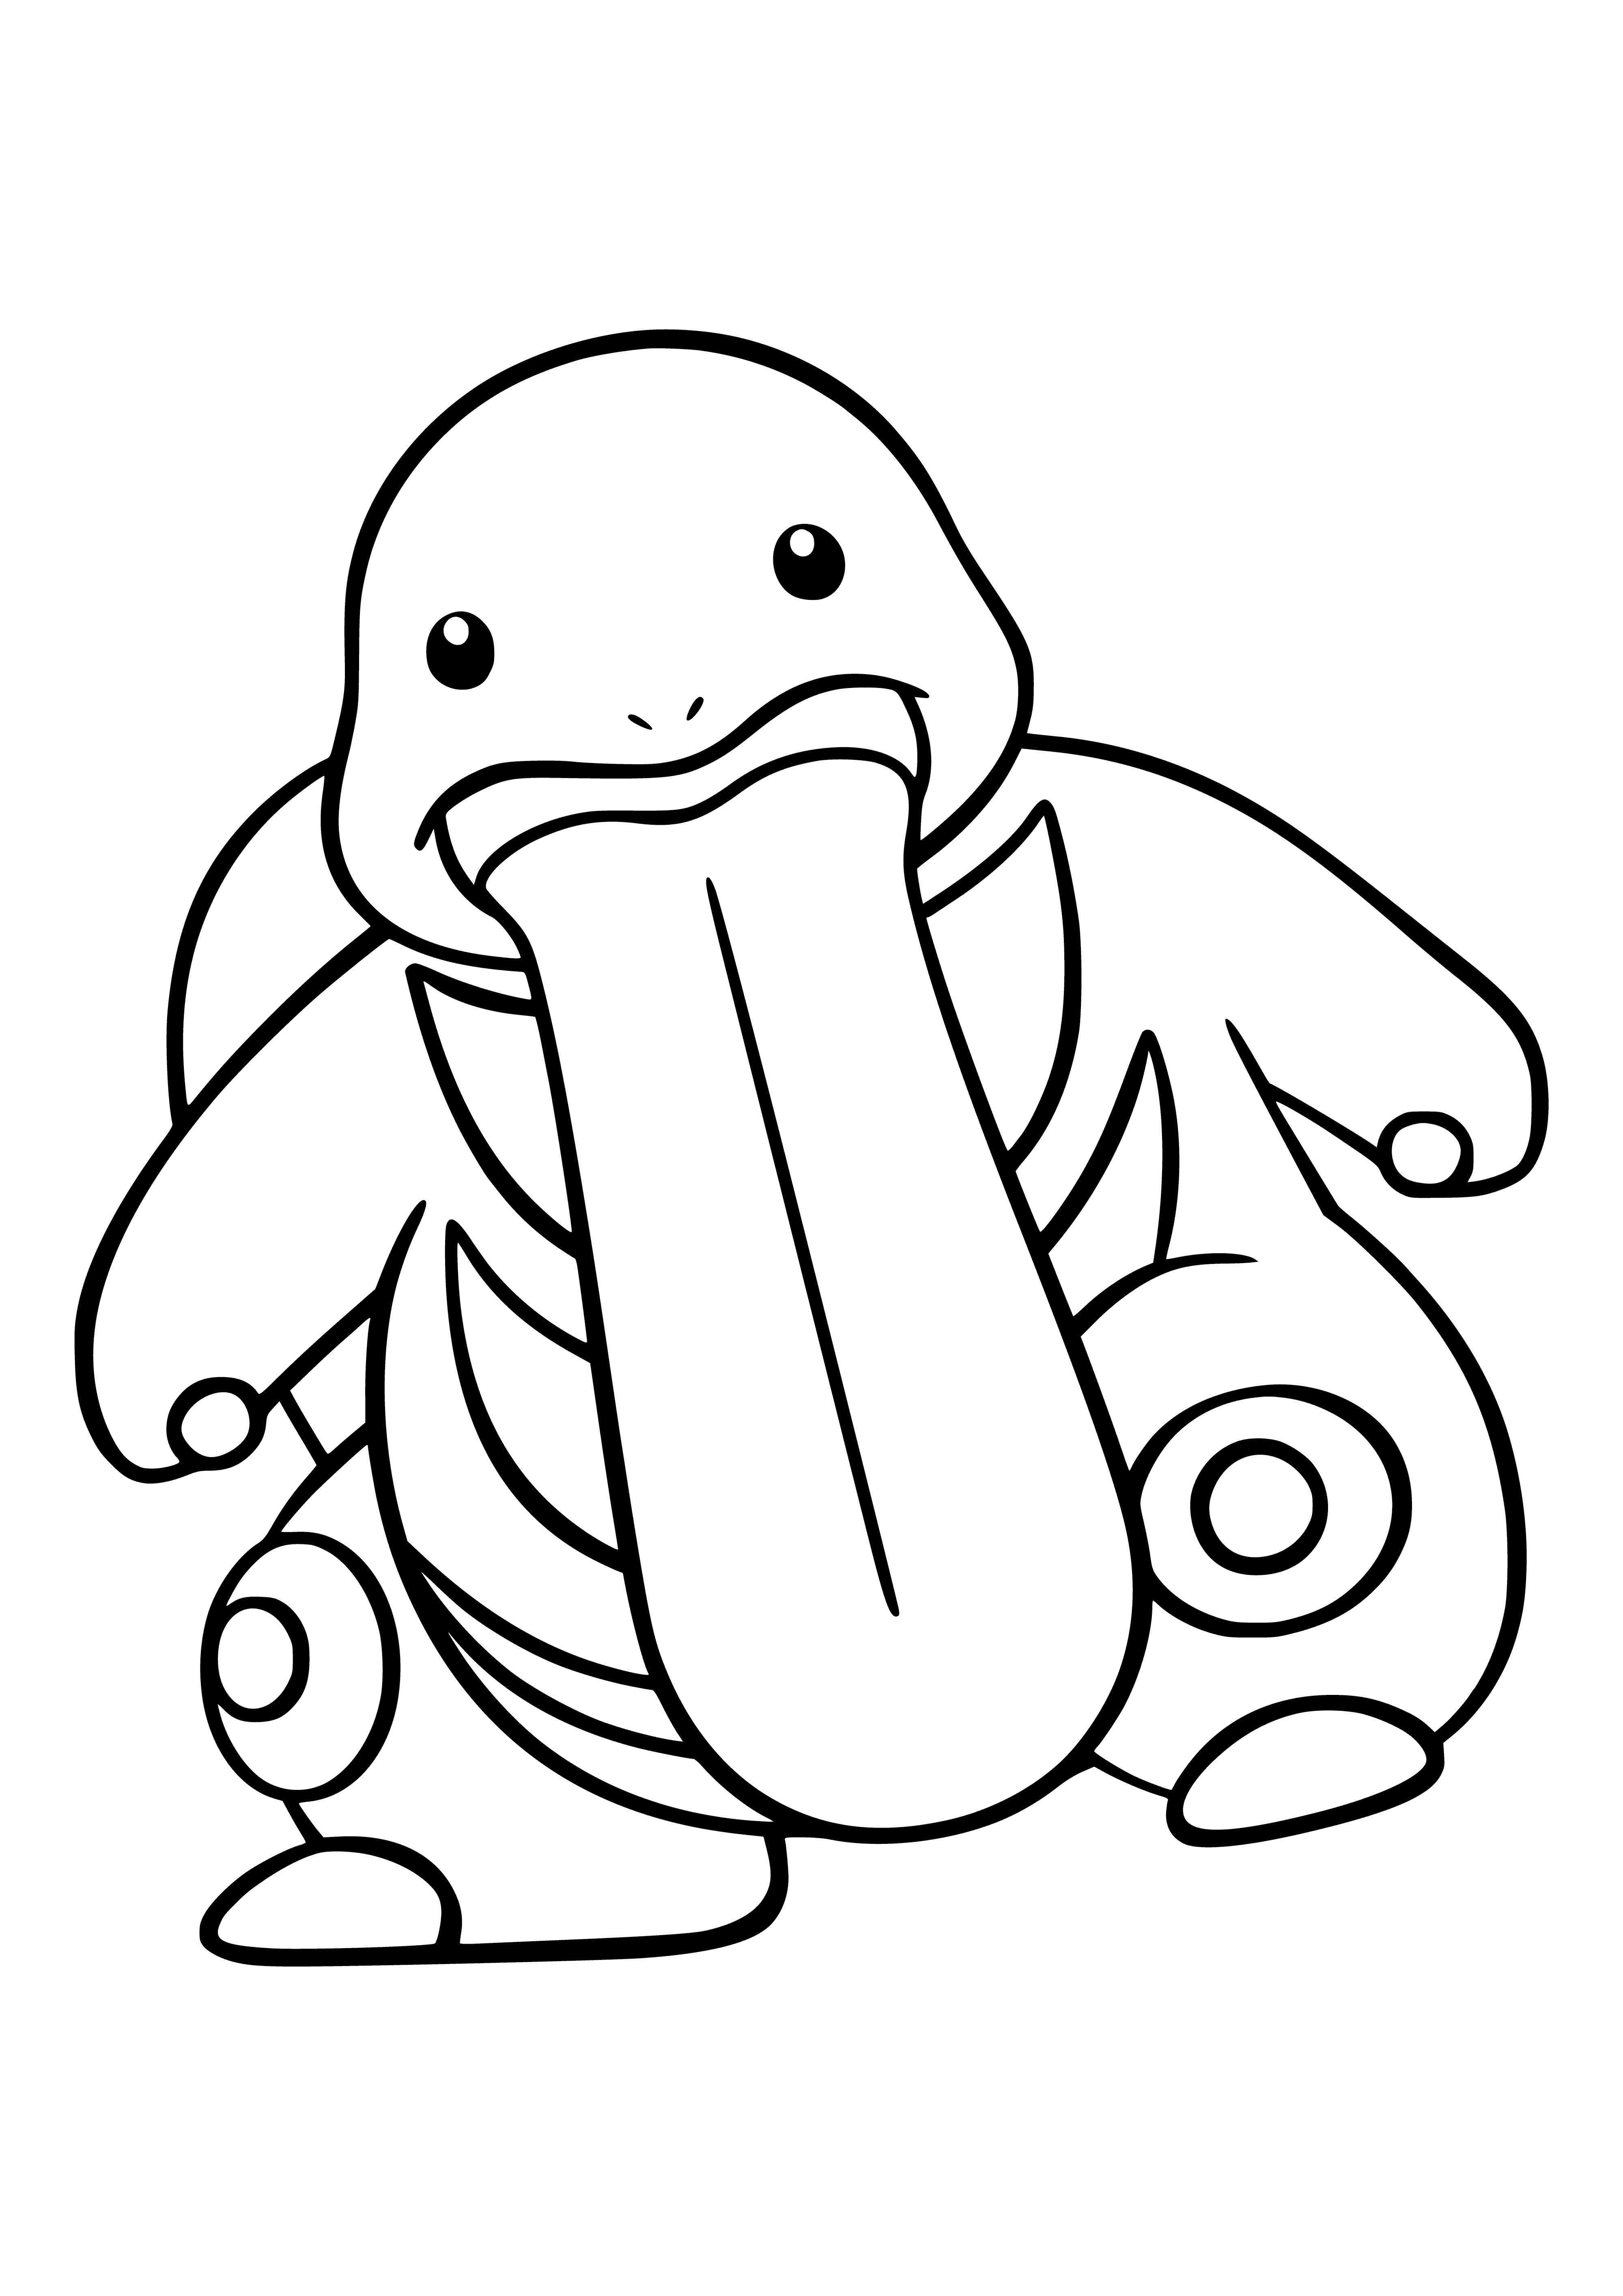 coloring page: Lickitung evolves from Lickitung and has a long tongue it can use as a weapon and to climb trees. Has versatile moveset to capture prey.